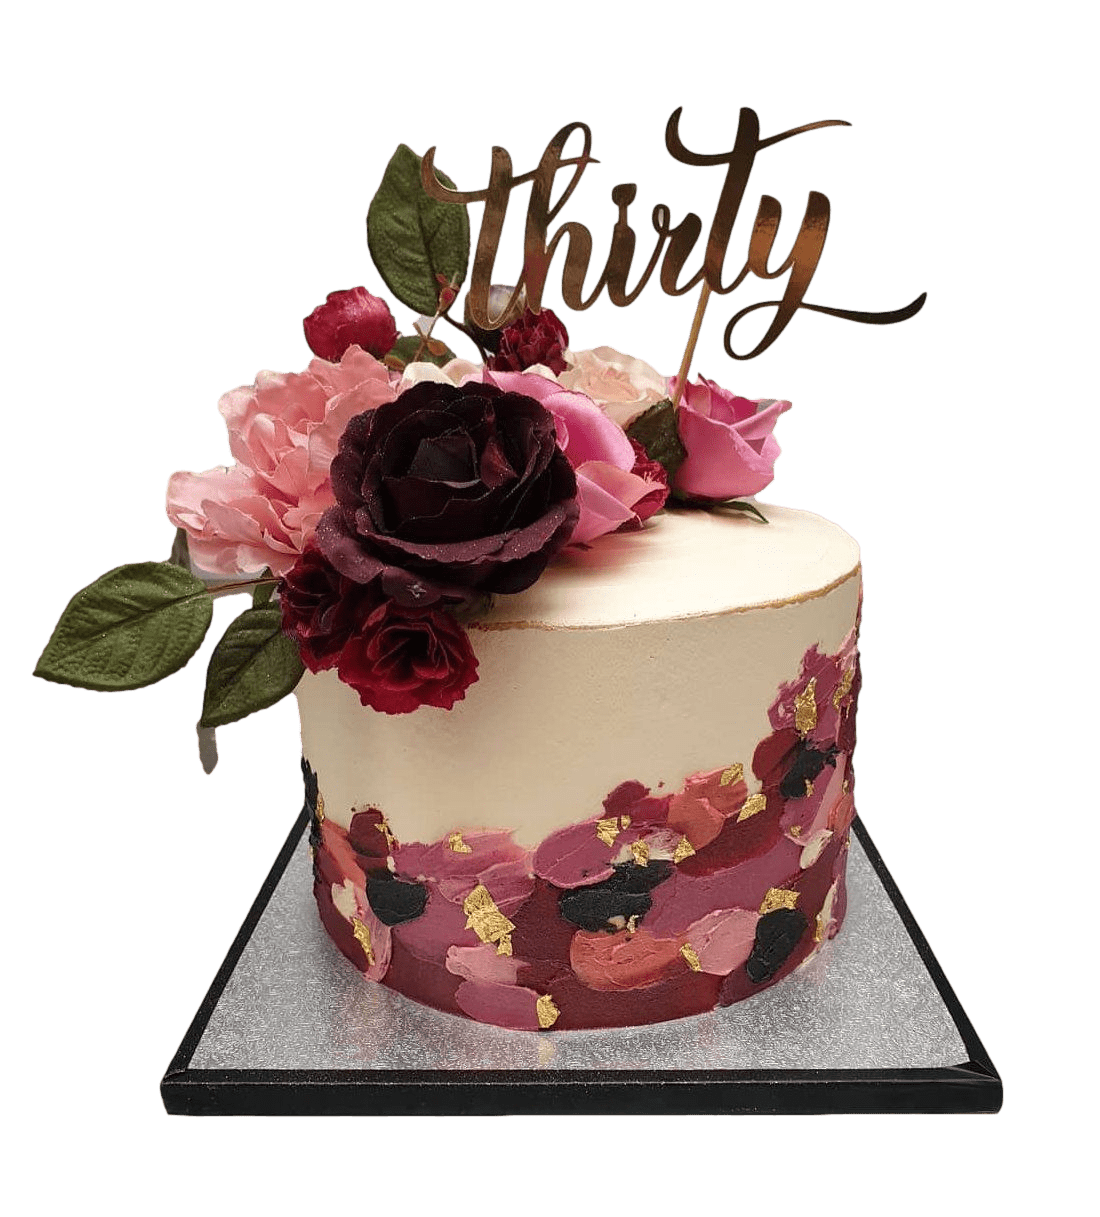 30TH BIRTHDAY CAKES FOR HER | THE CRVAERY CAKES